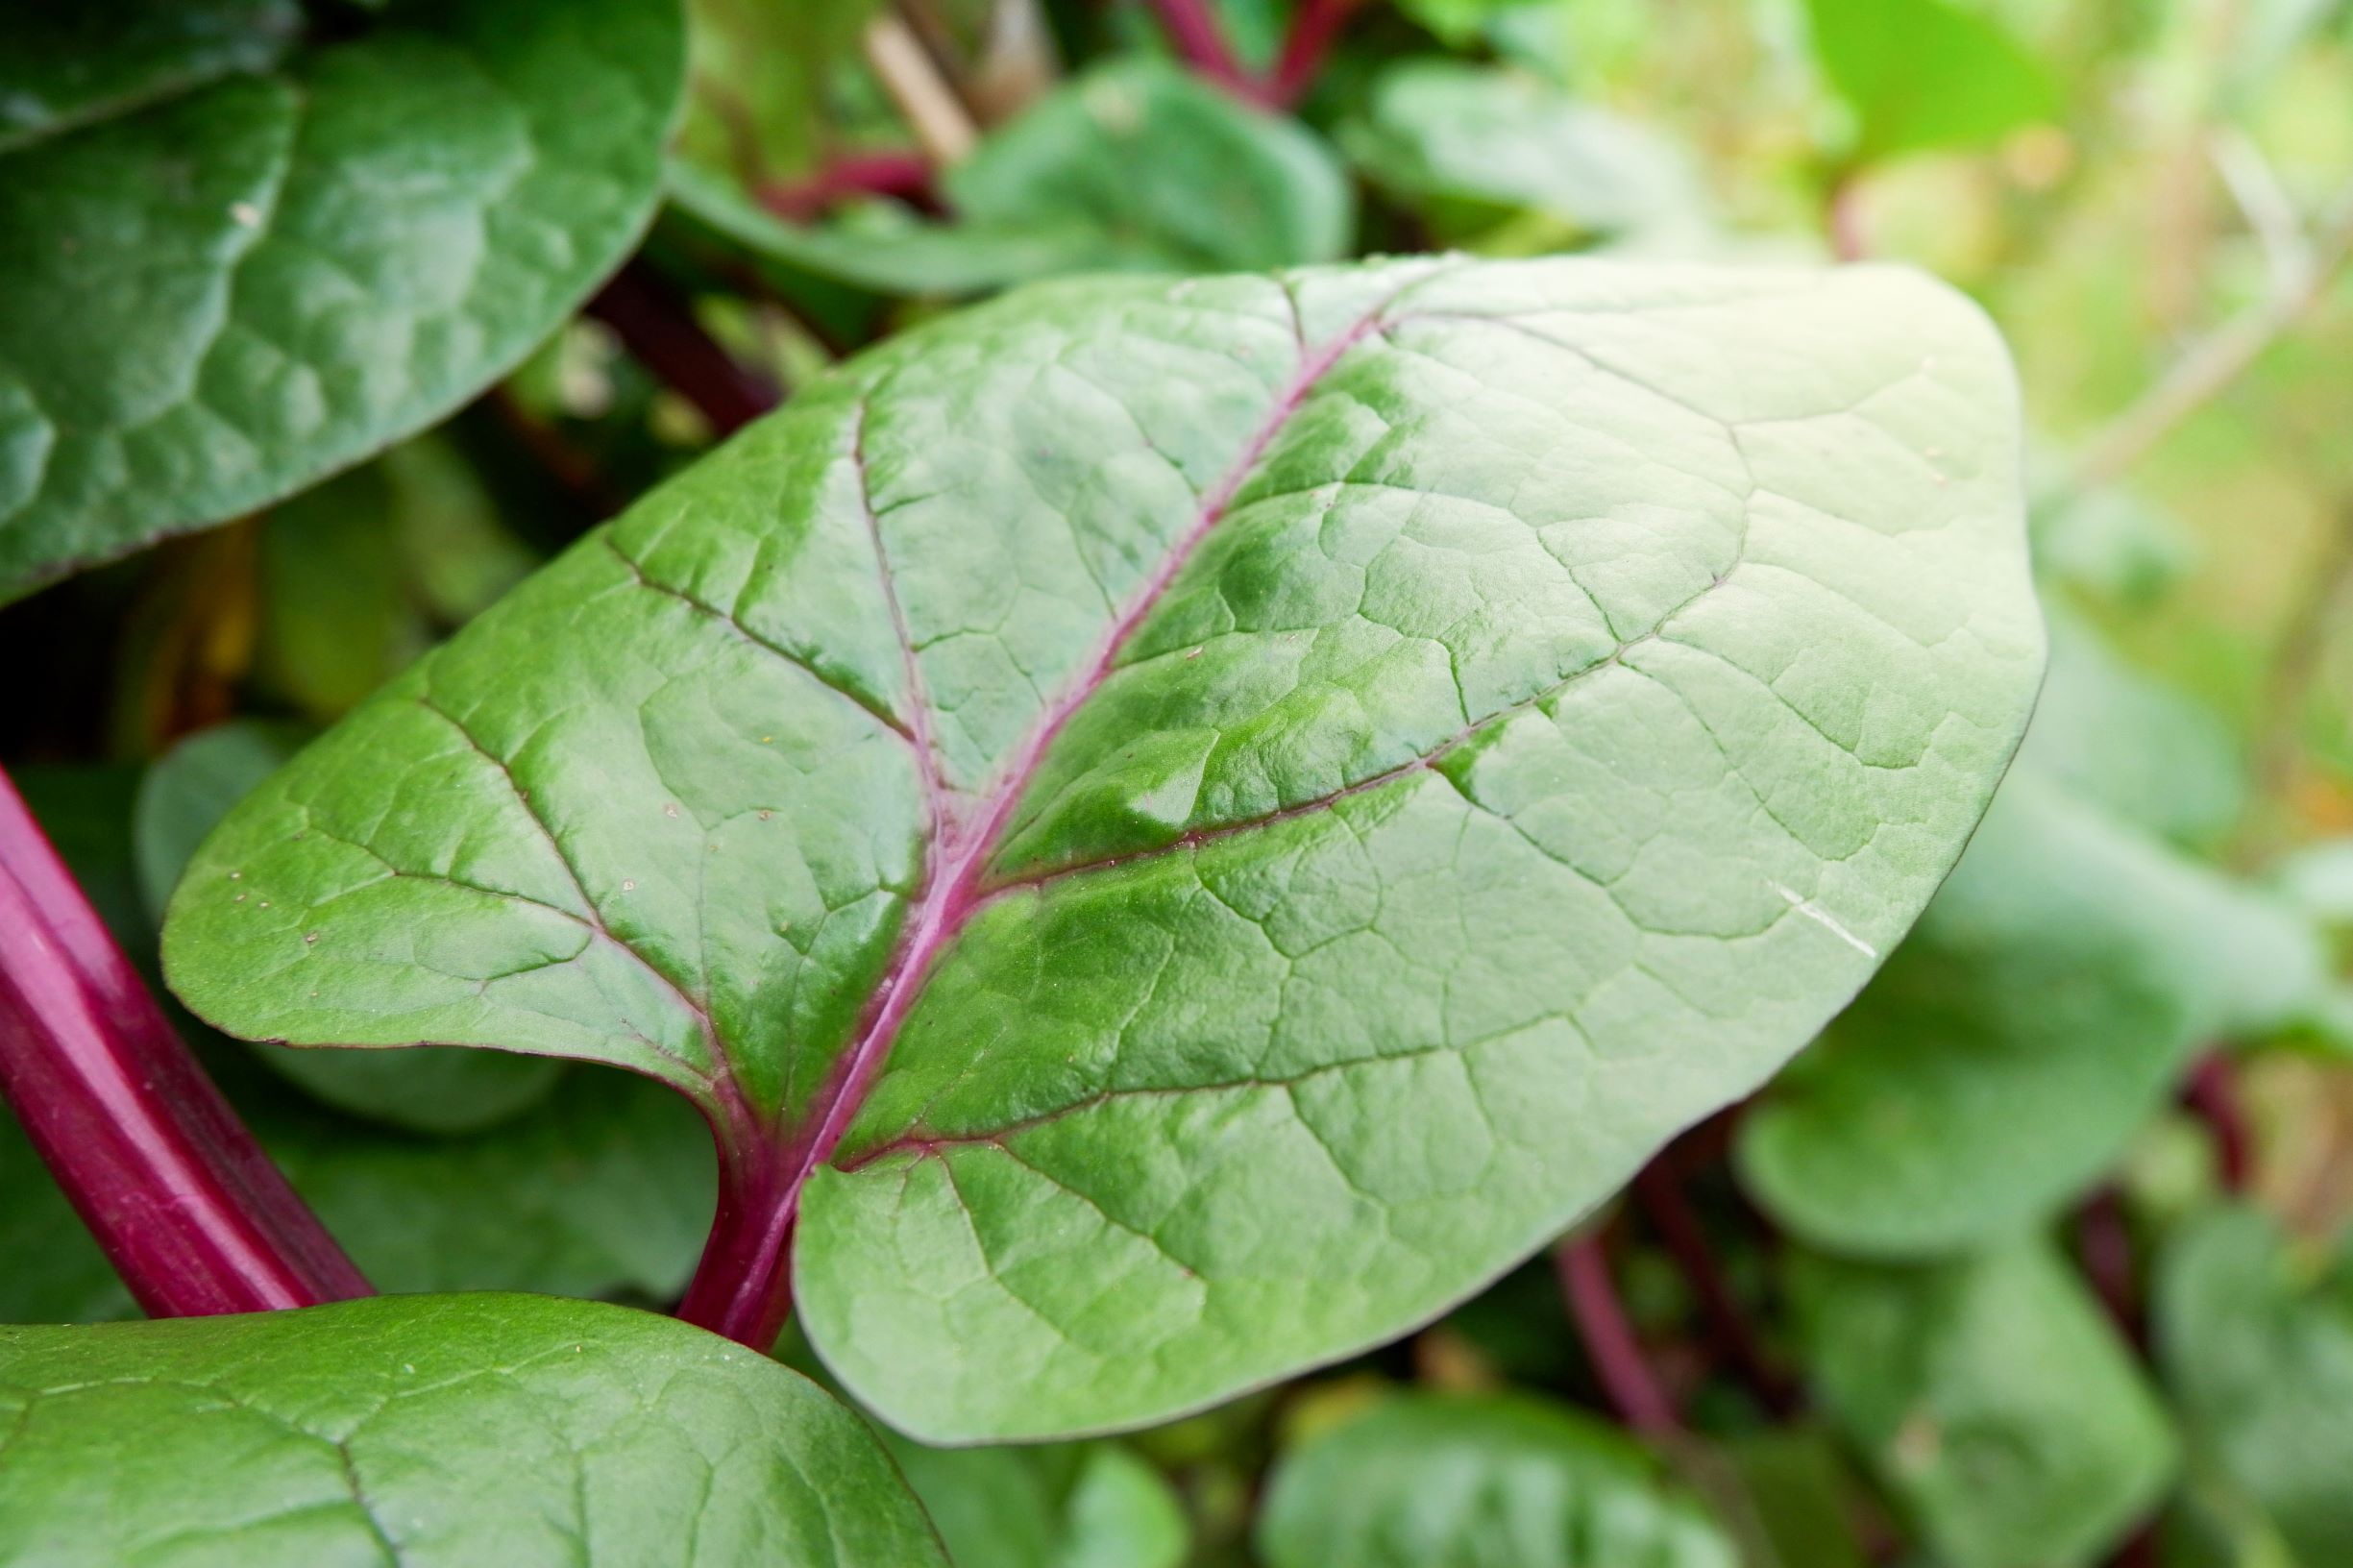 FREE Bonus 6 Variety Seed Pack Red Malabar Spinach Seeds Packed in FROZEN SEED CAPSULES for Growing Seeds Now or Saving Seeds for Years a $29.95 Value 20+ Rare Seeds 